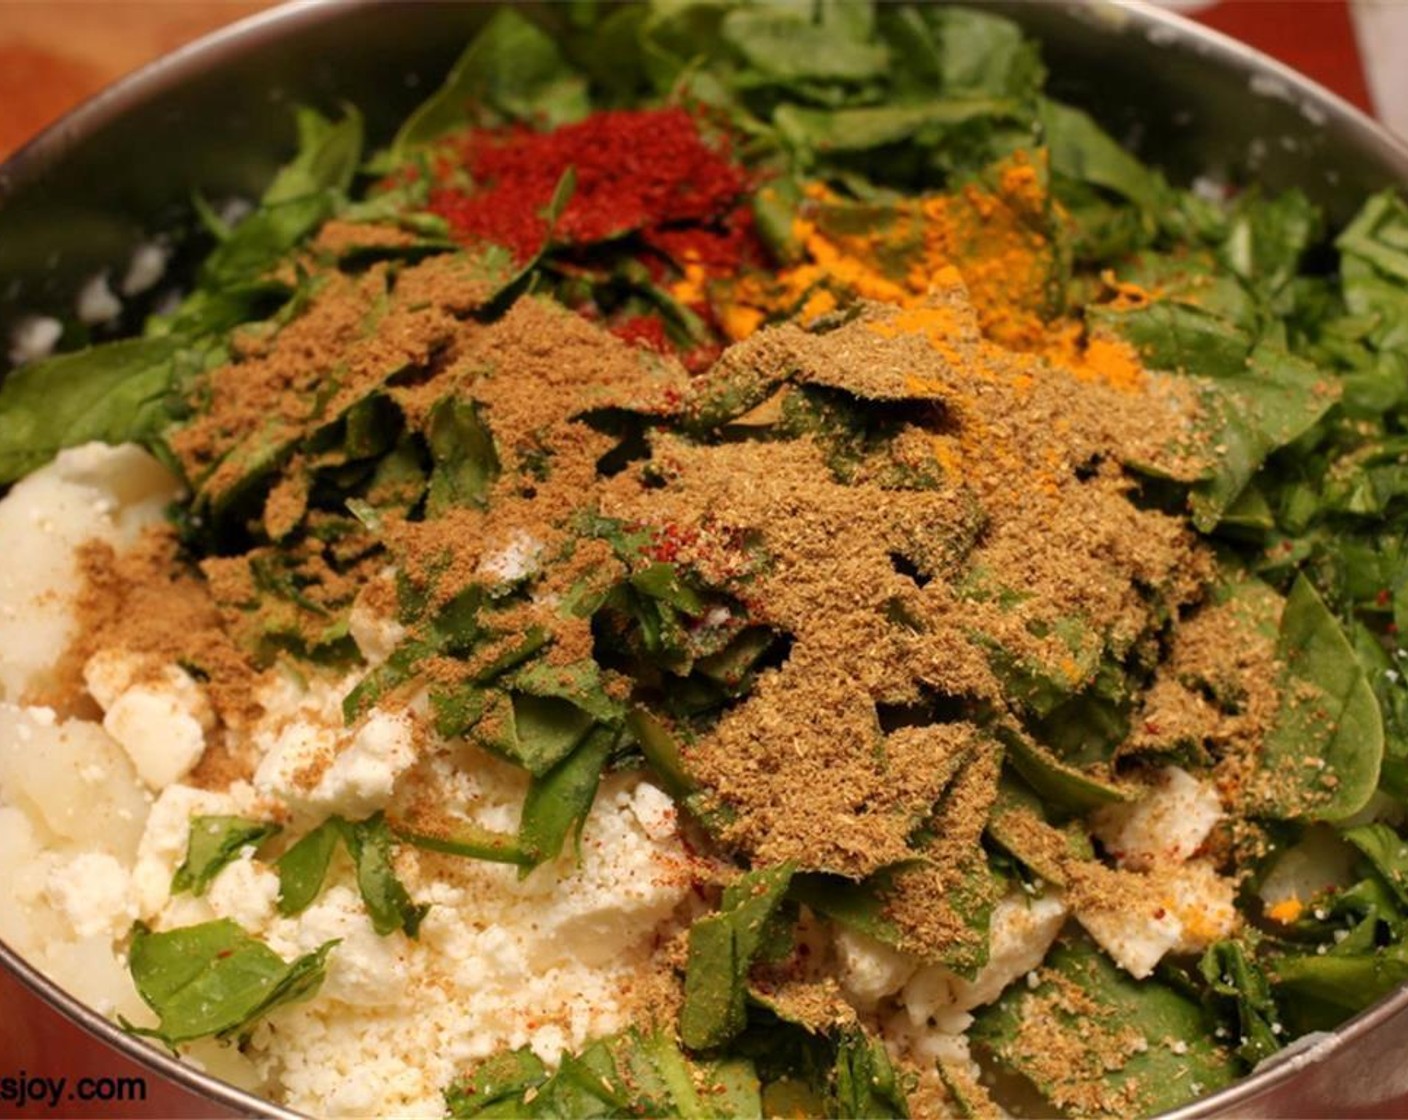 step 2 Mix with Fresh Spinach (2 cups), Chili Powder (1 tsp), Feta Cheese (1/2 cup), Ground Coriander (1/2 Tbsp), Ground Cumin (1/2 tsp), Salt (to taste), and Ground Turmeric (1 pinch). Set filling aside.